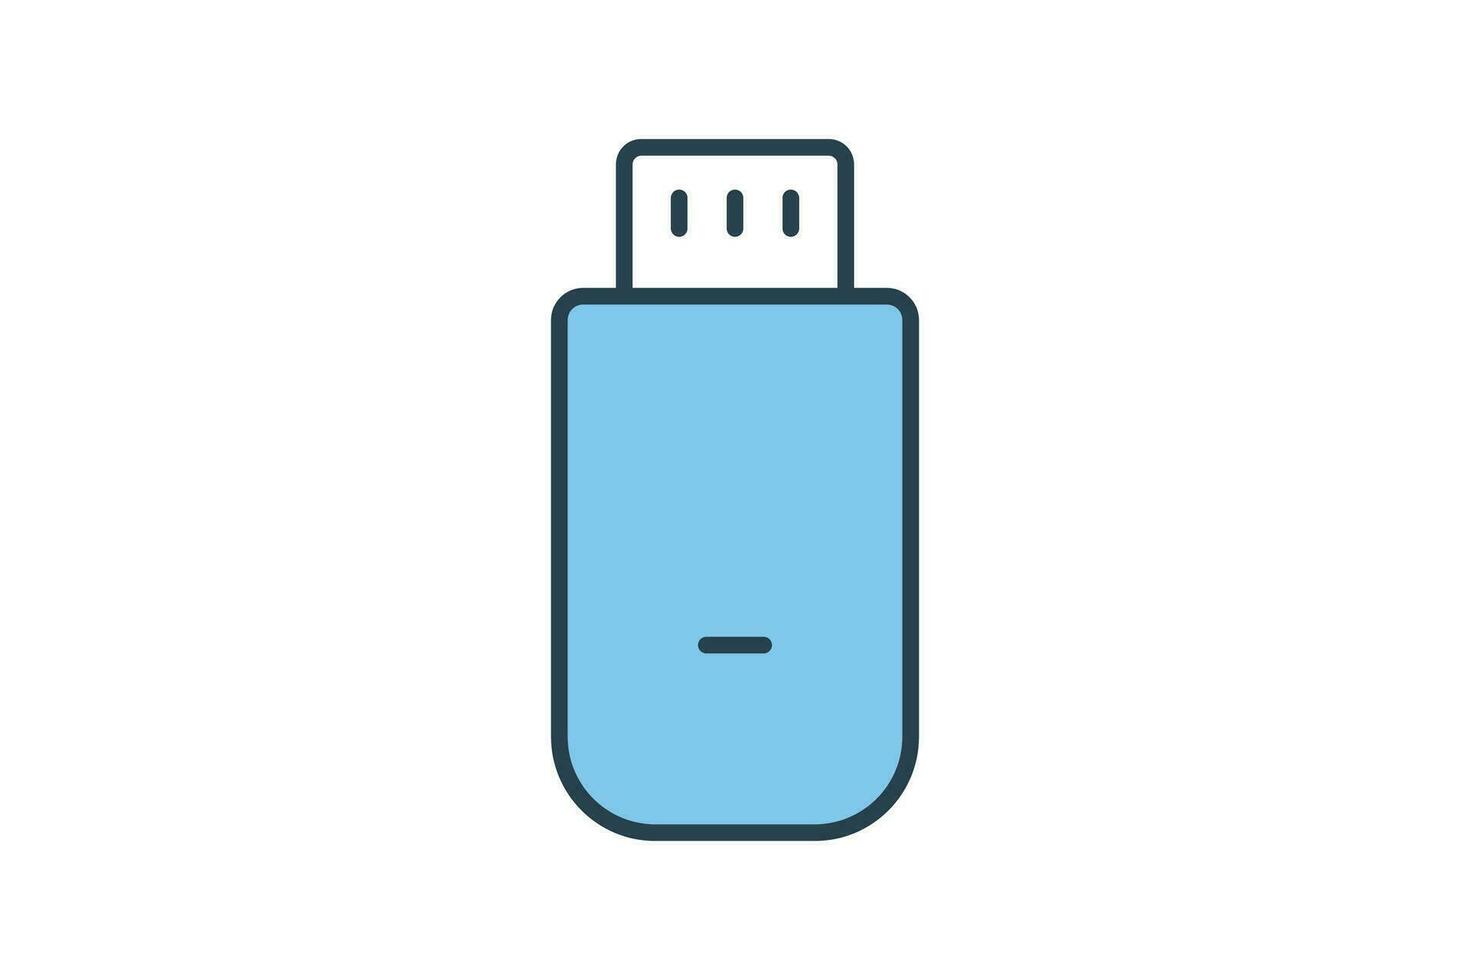 usb icon. icon related to device, computer technology. flat line icon style. simple vector design editable